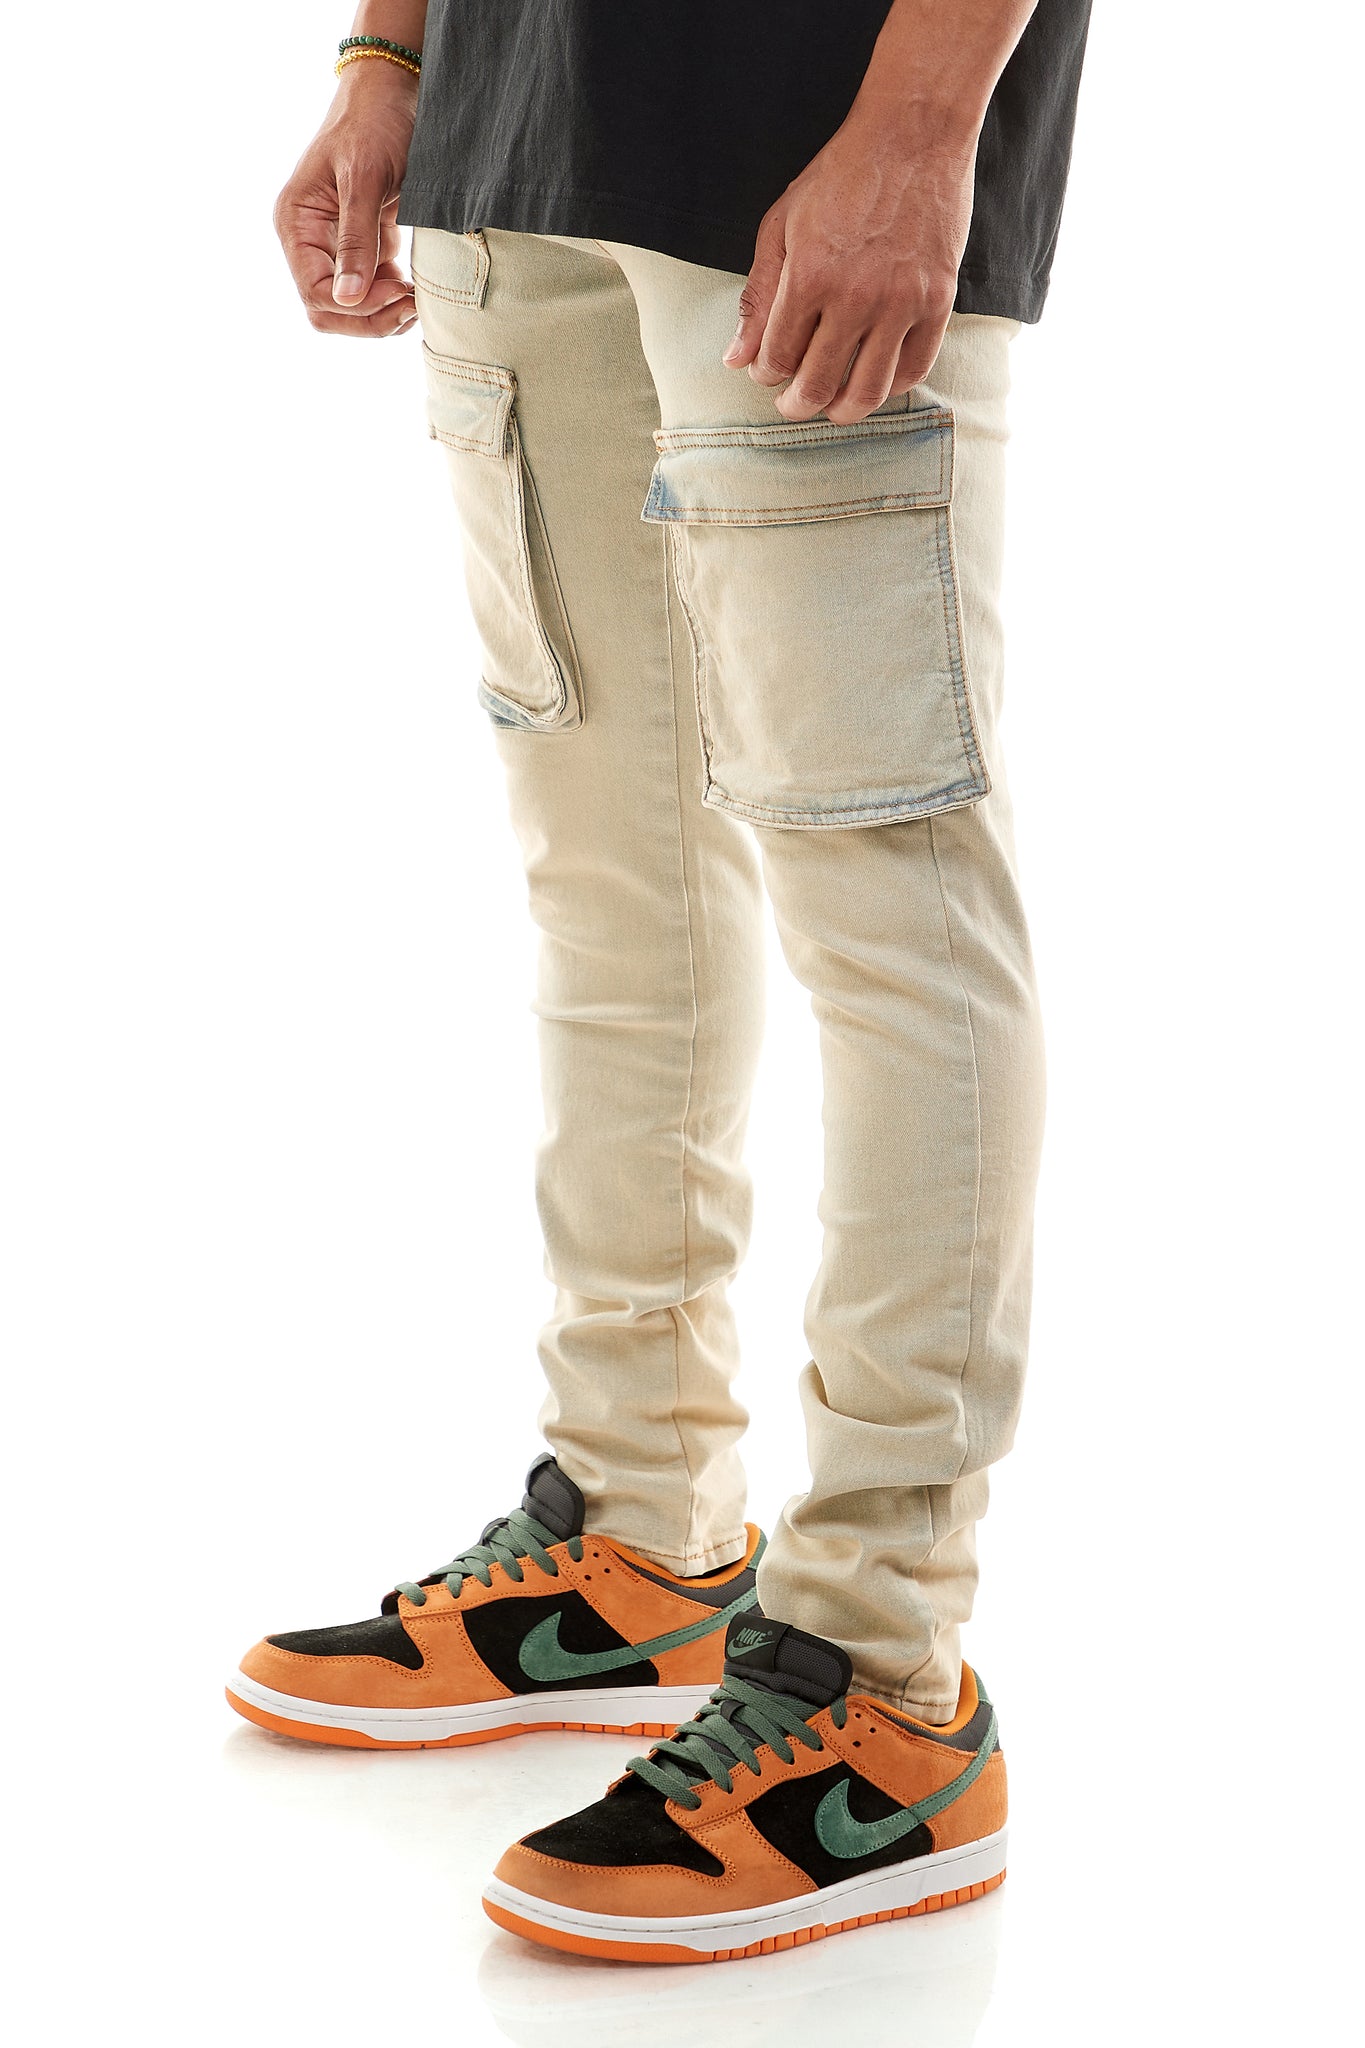 ZIPPED DOUBLE CARGO JEANS